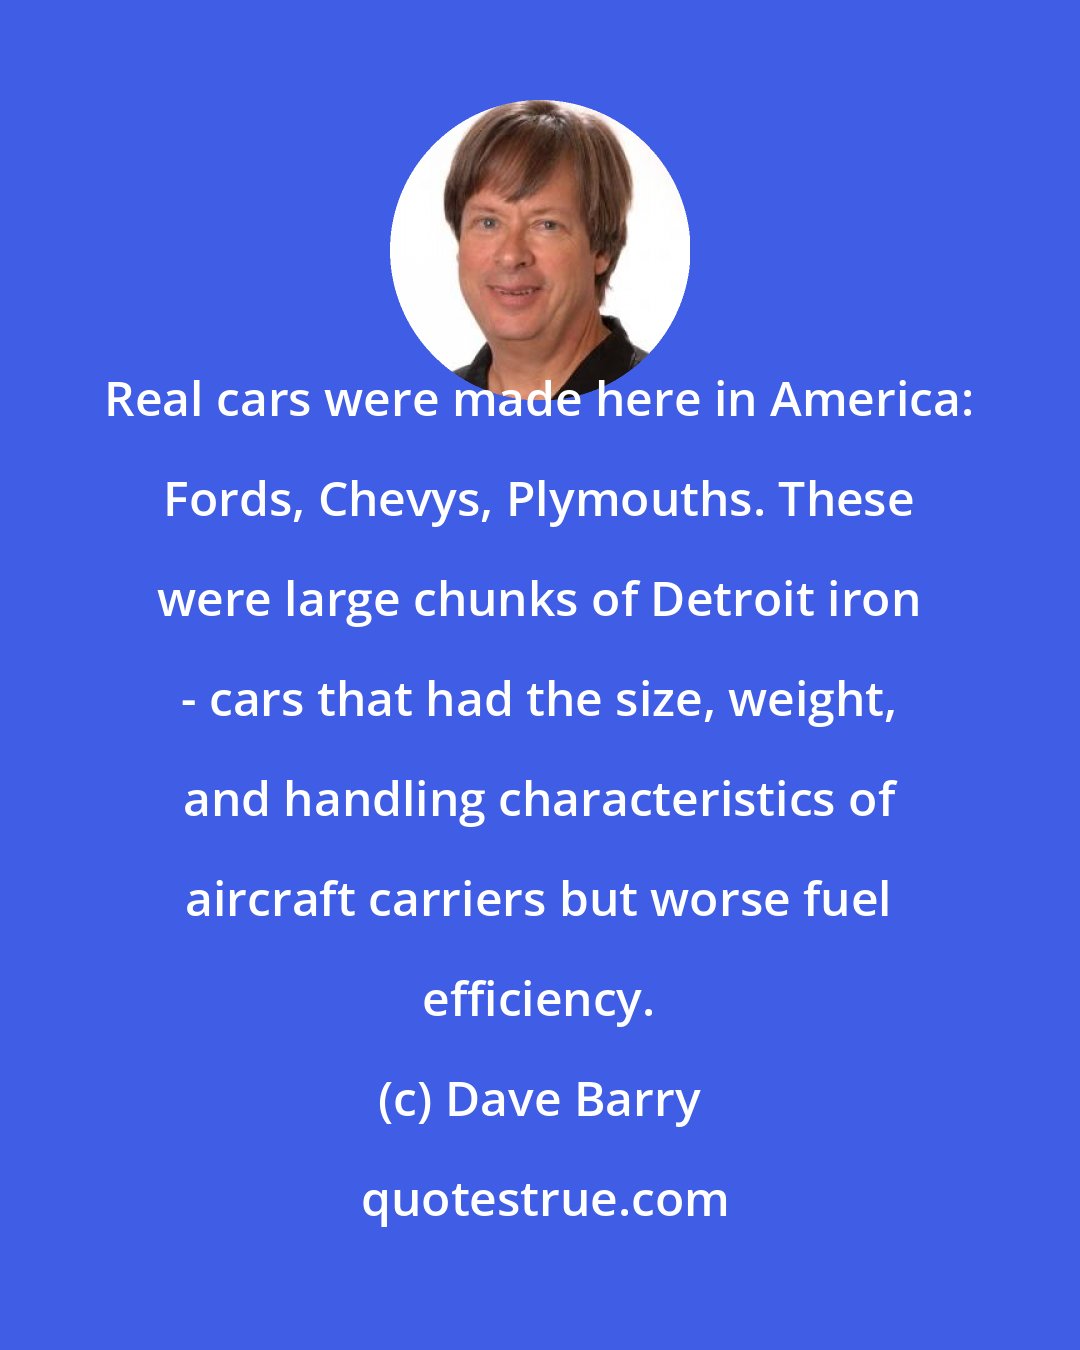 Dave Barry: Real cars were made here in America: Fords, Chevys, Plymouths. These were large chunks of Detroit iron - cars that had the size, weight, and handling characteristics of aircraft carriers but worse fuel efficiency.